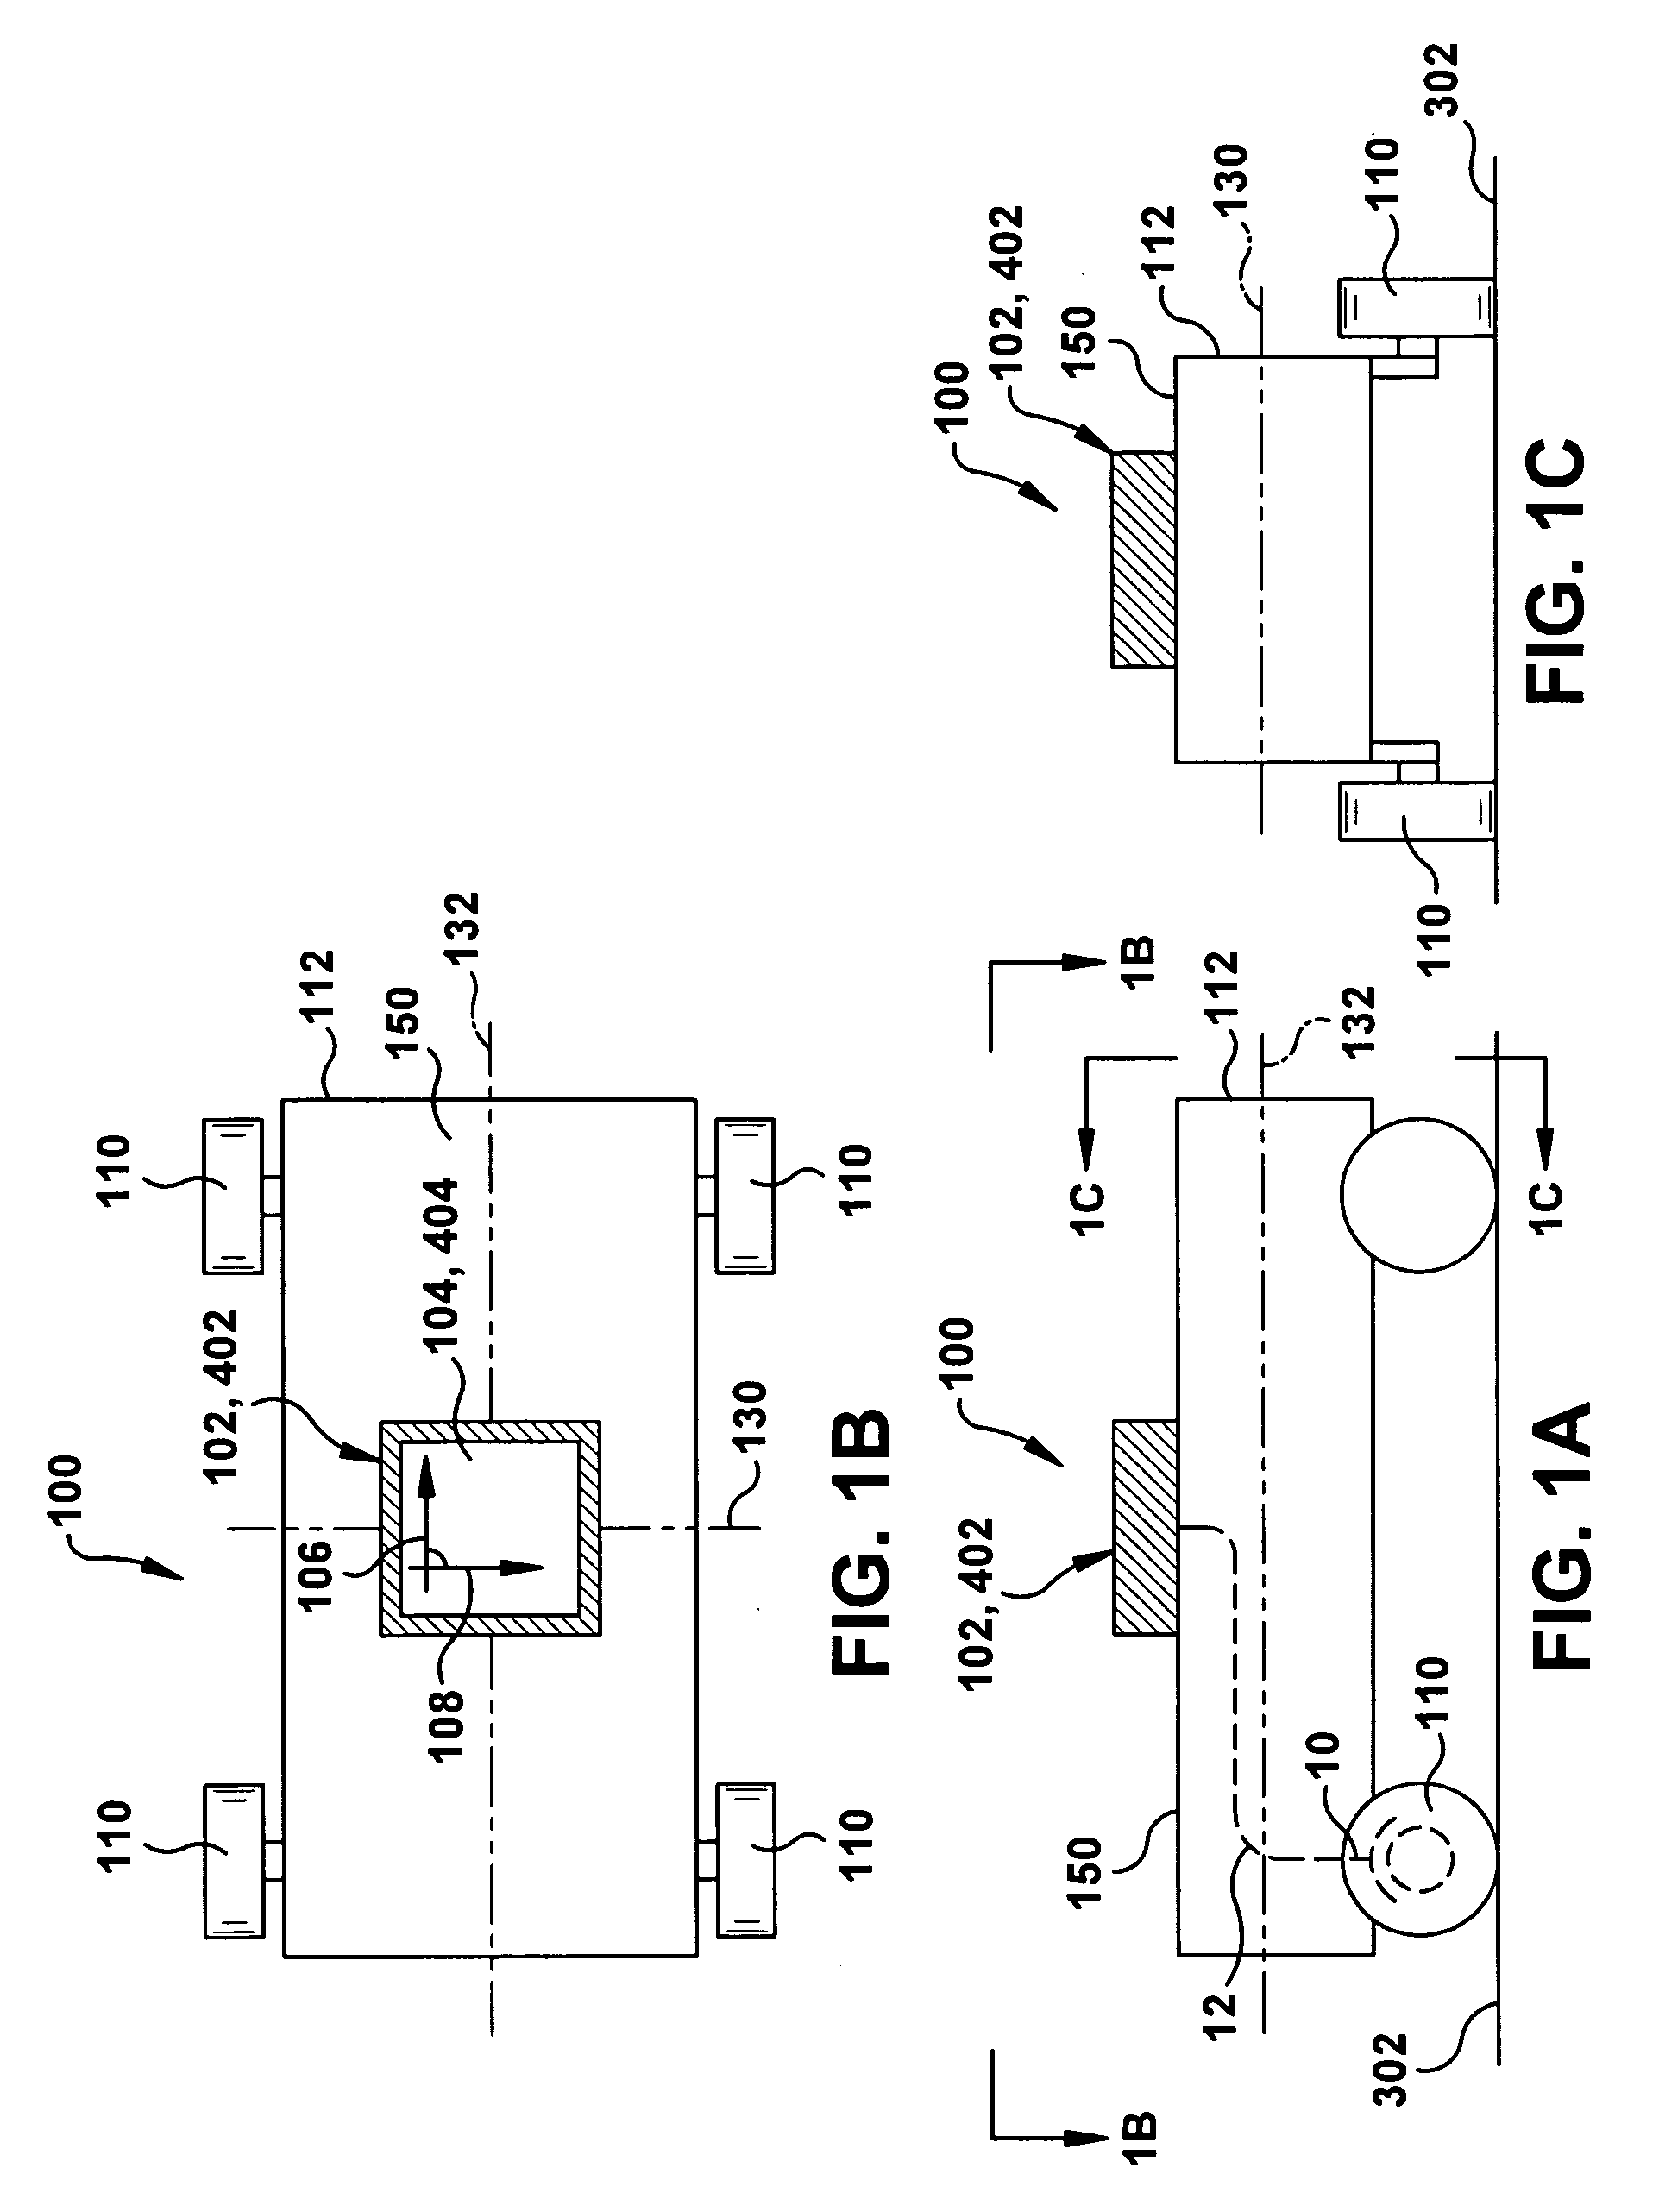 Tilt and/or acceleration sensing apparatus and method